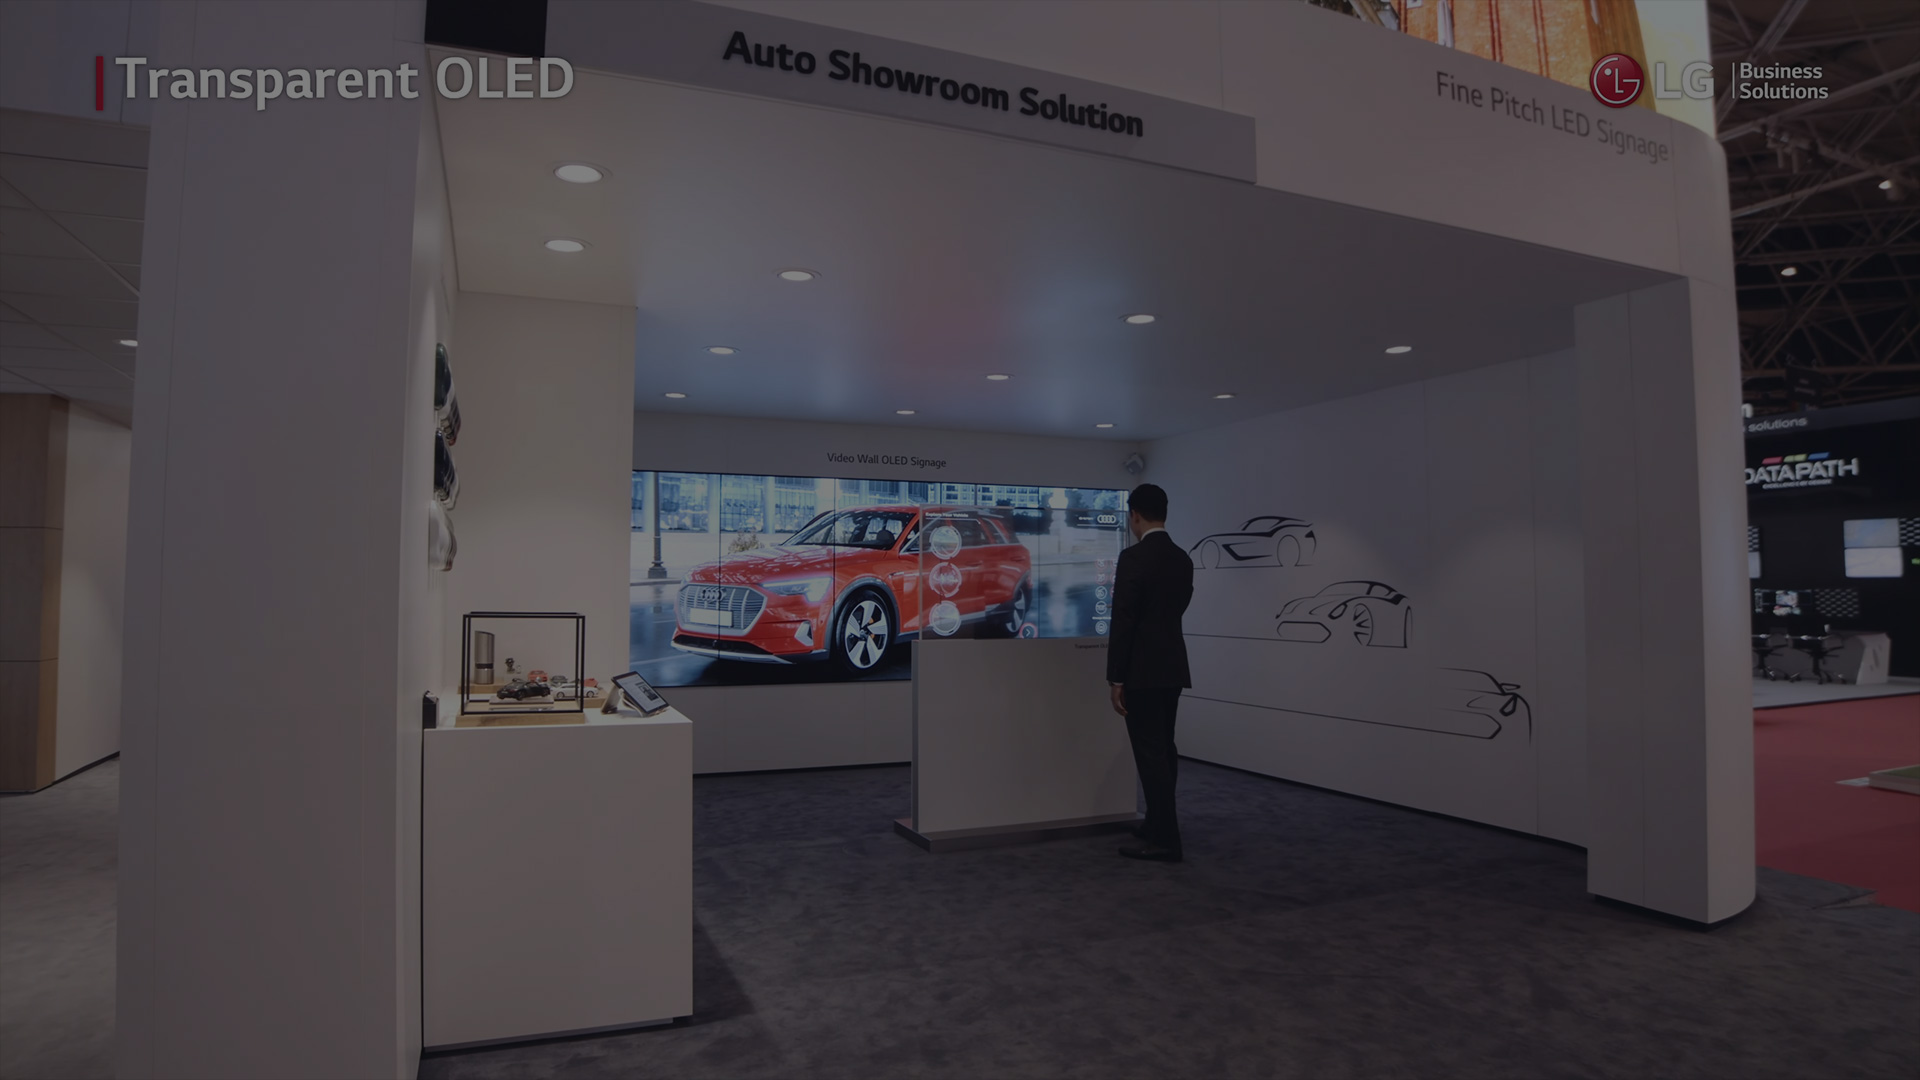 ISE 2019 overview video